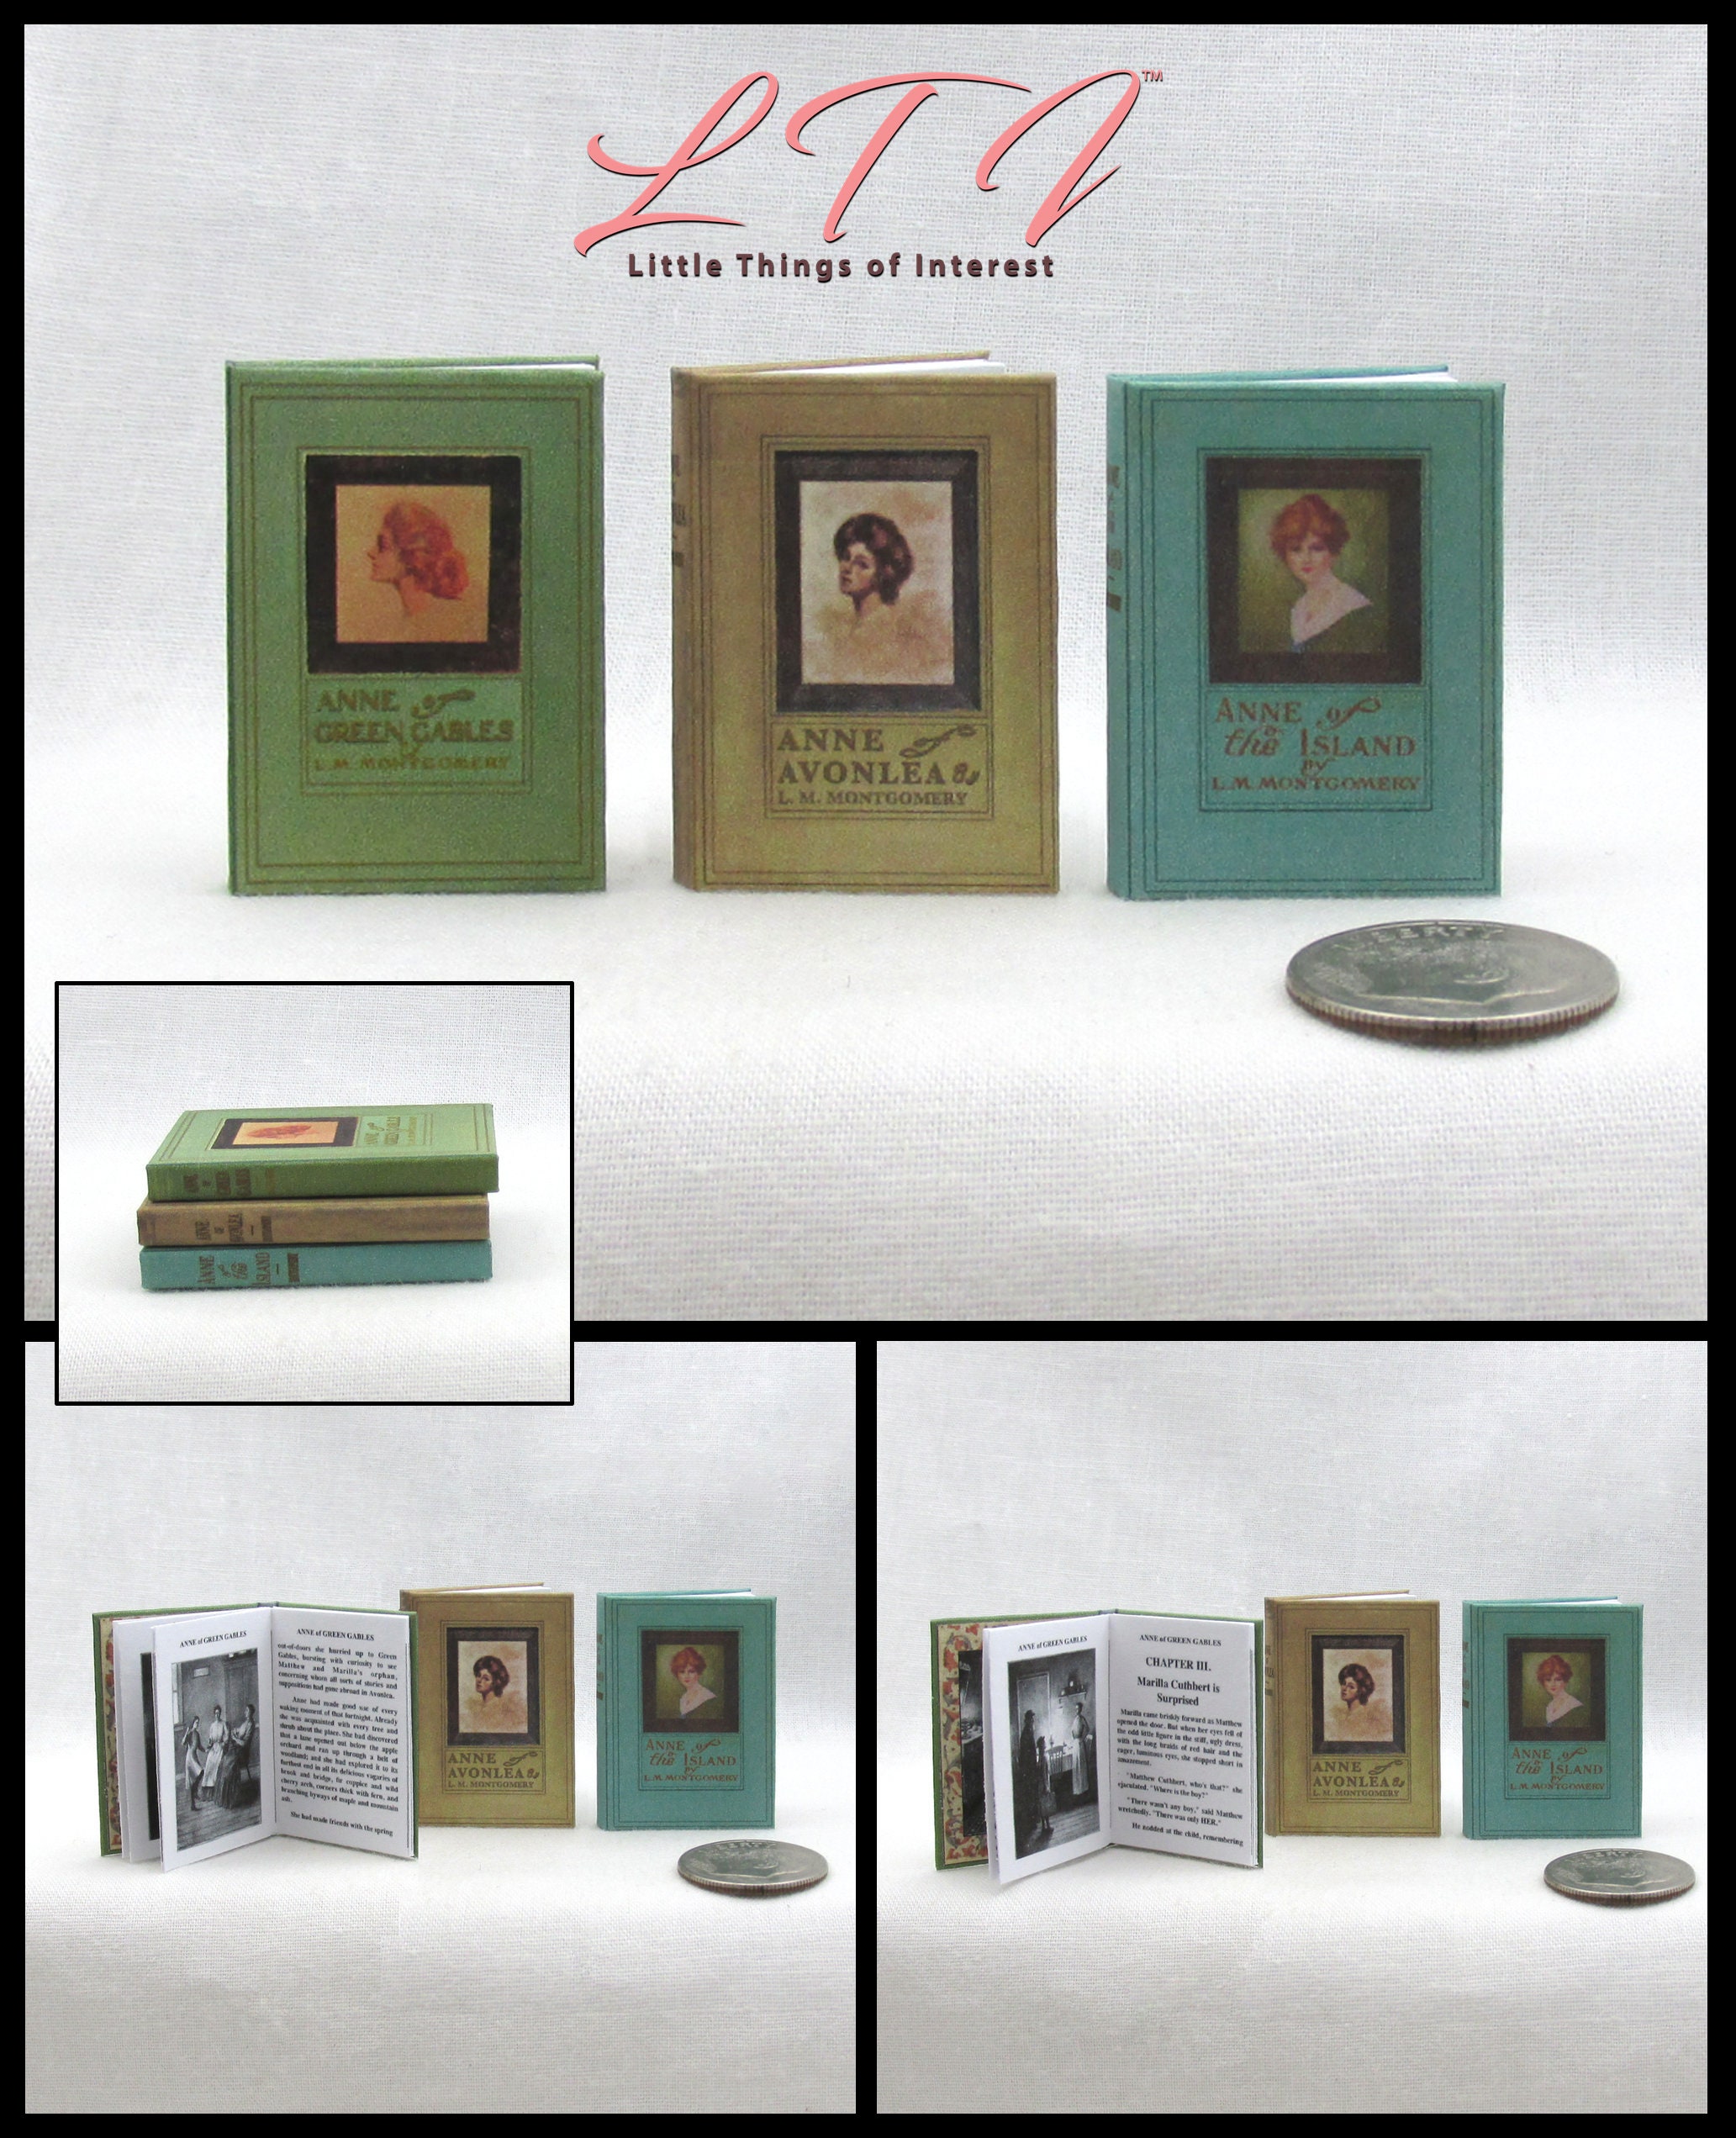 1:6 SCALE MINIATURE BOOK ANNE OF GREEN GABLES ILLUSTRATED PLAYSCALE BARBIE SCALE 